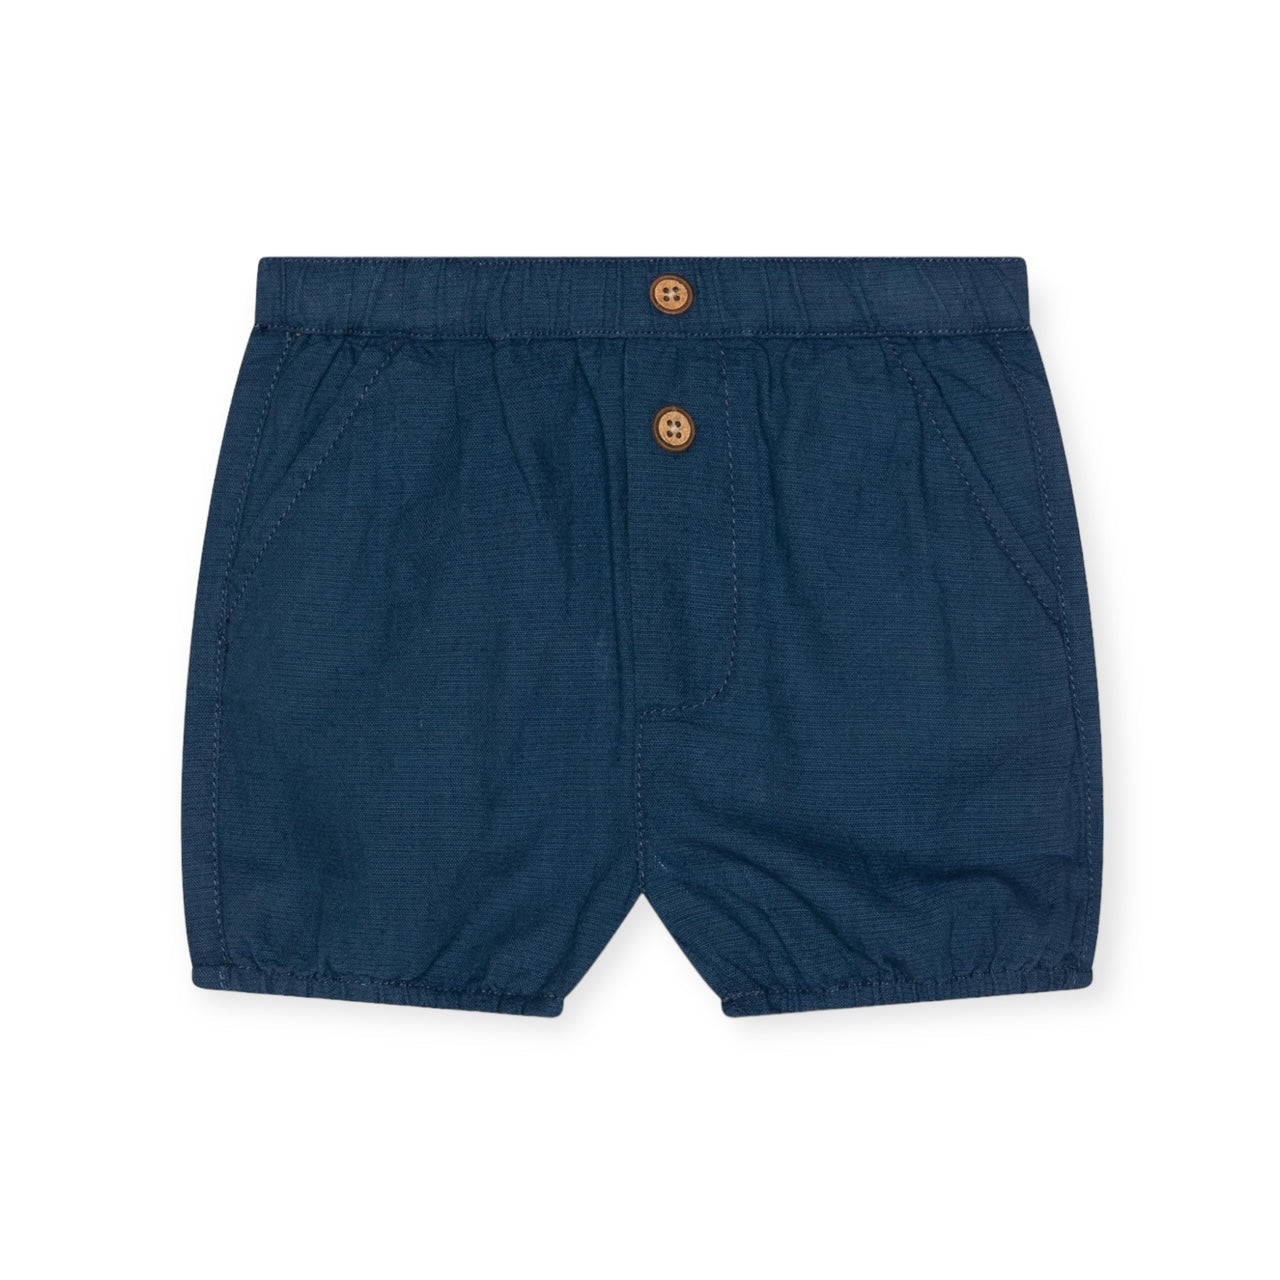 HUST and CLAIRE Shorts "Blue Moon" - Siliblu Boutique & Atelier